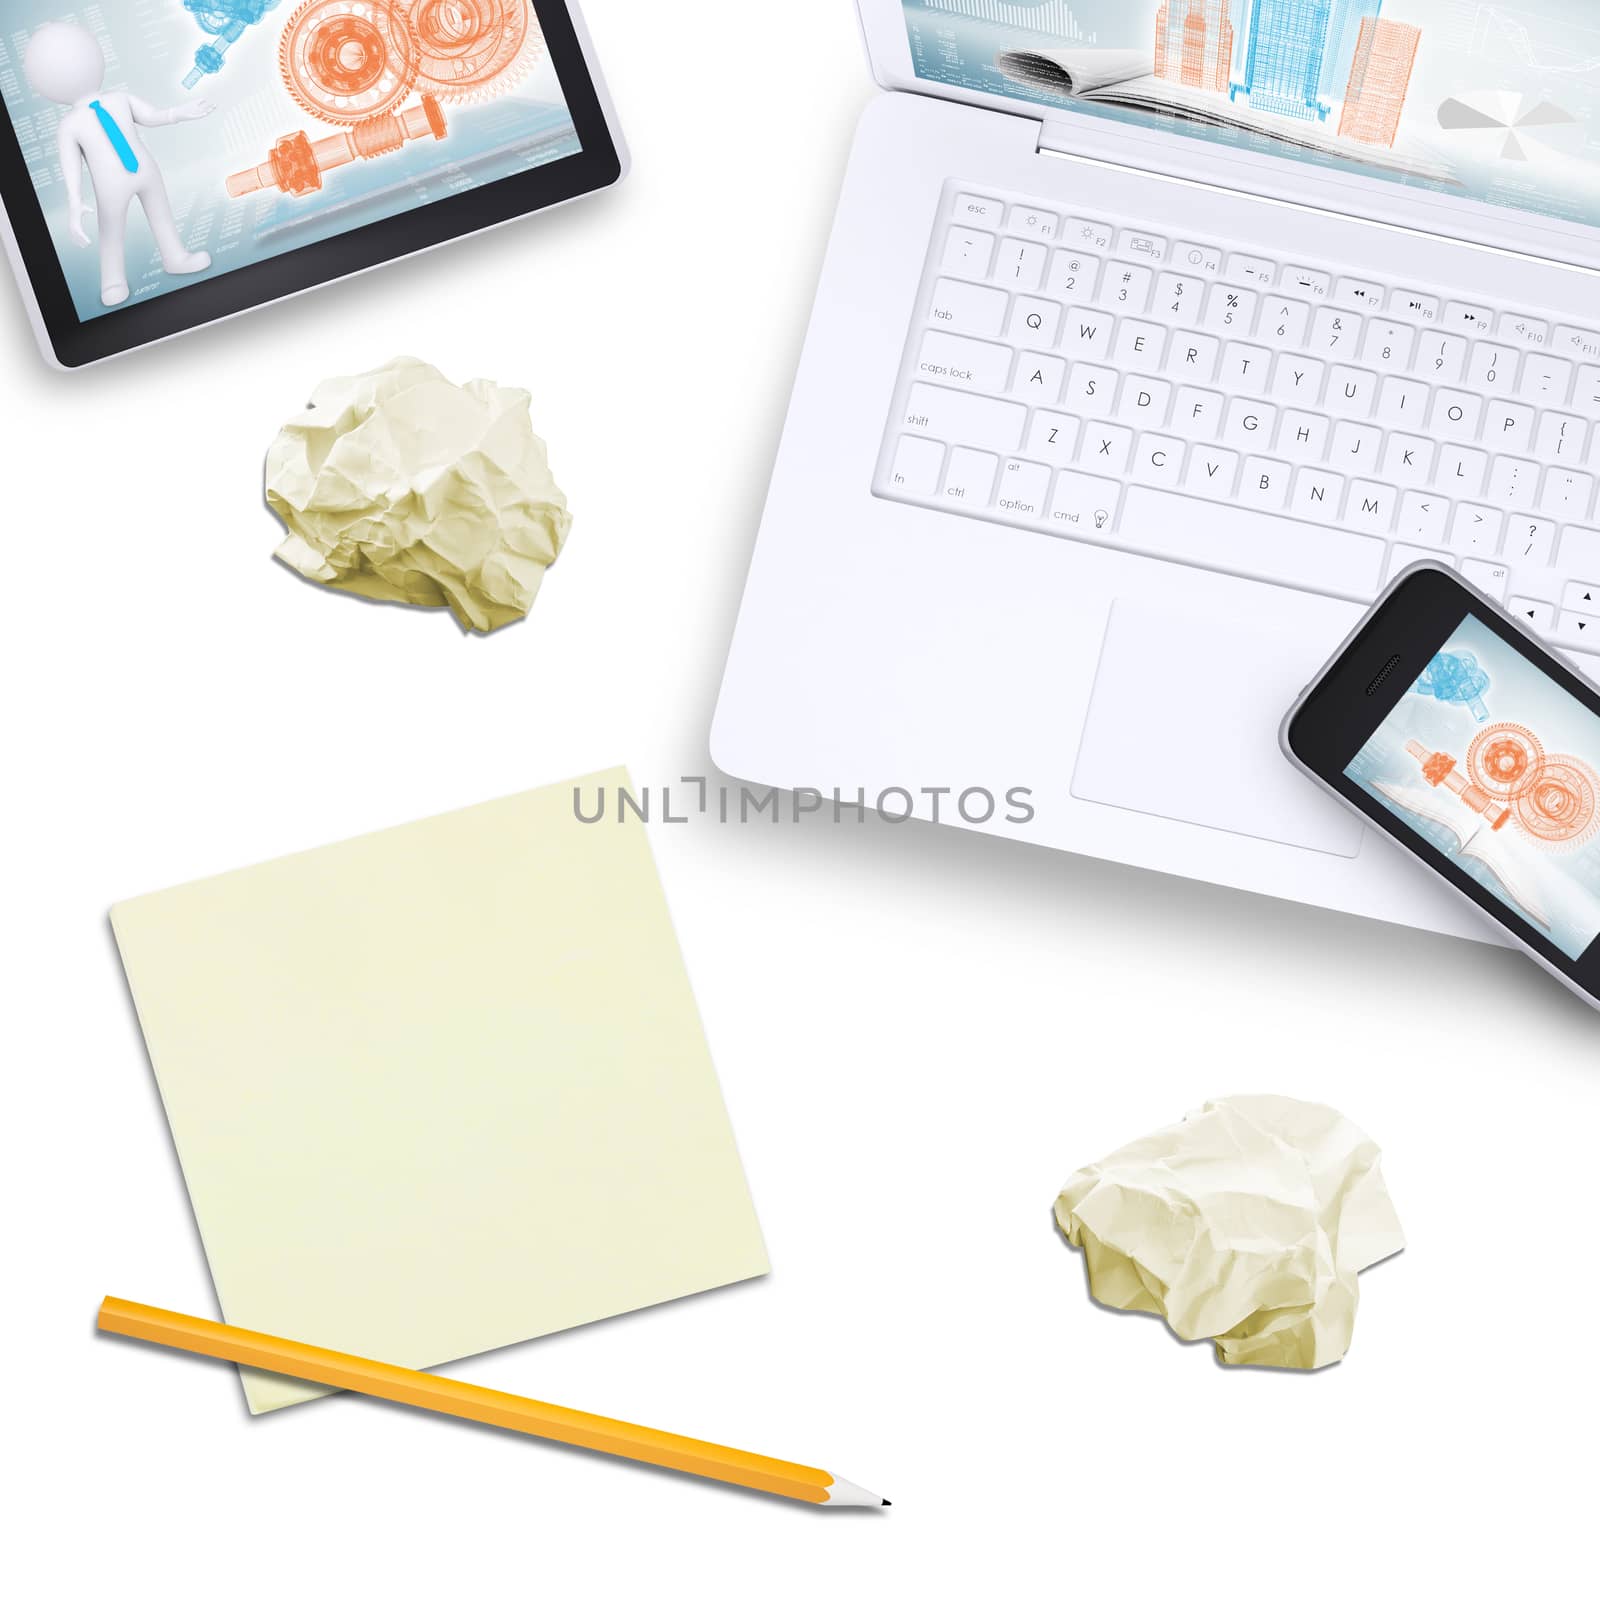 Phone on laptop with tablet, note paper near by cherezoff